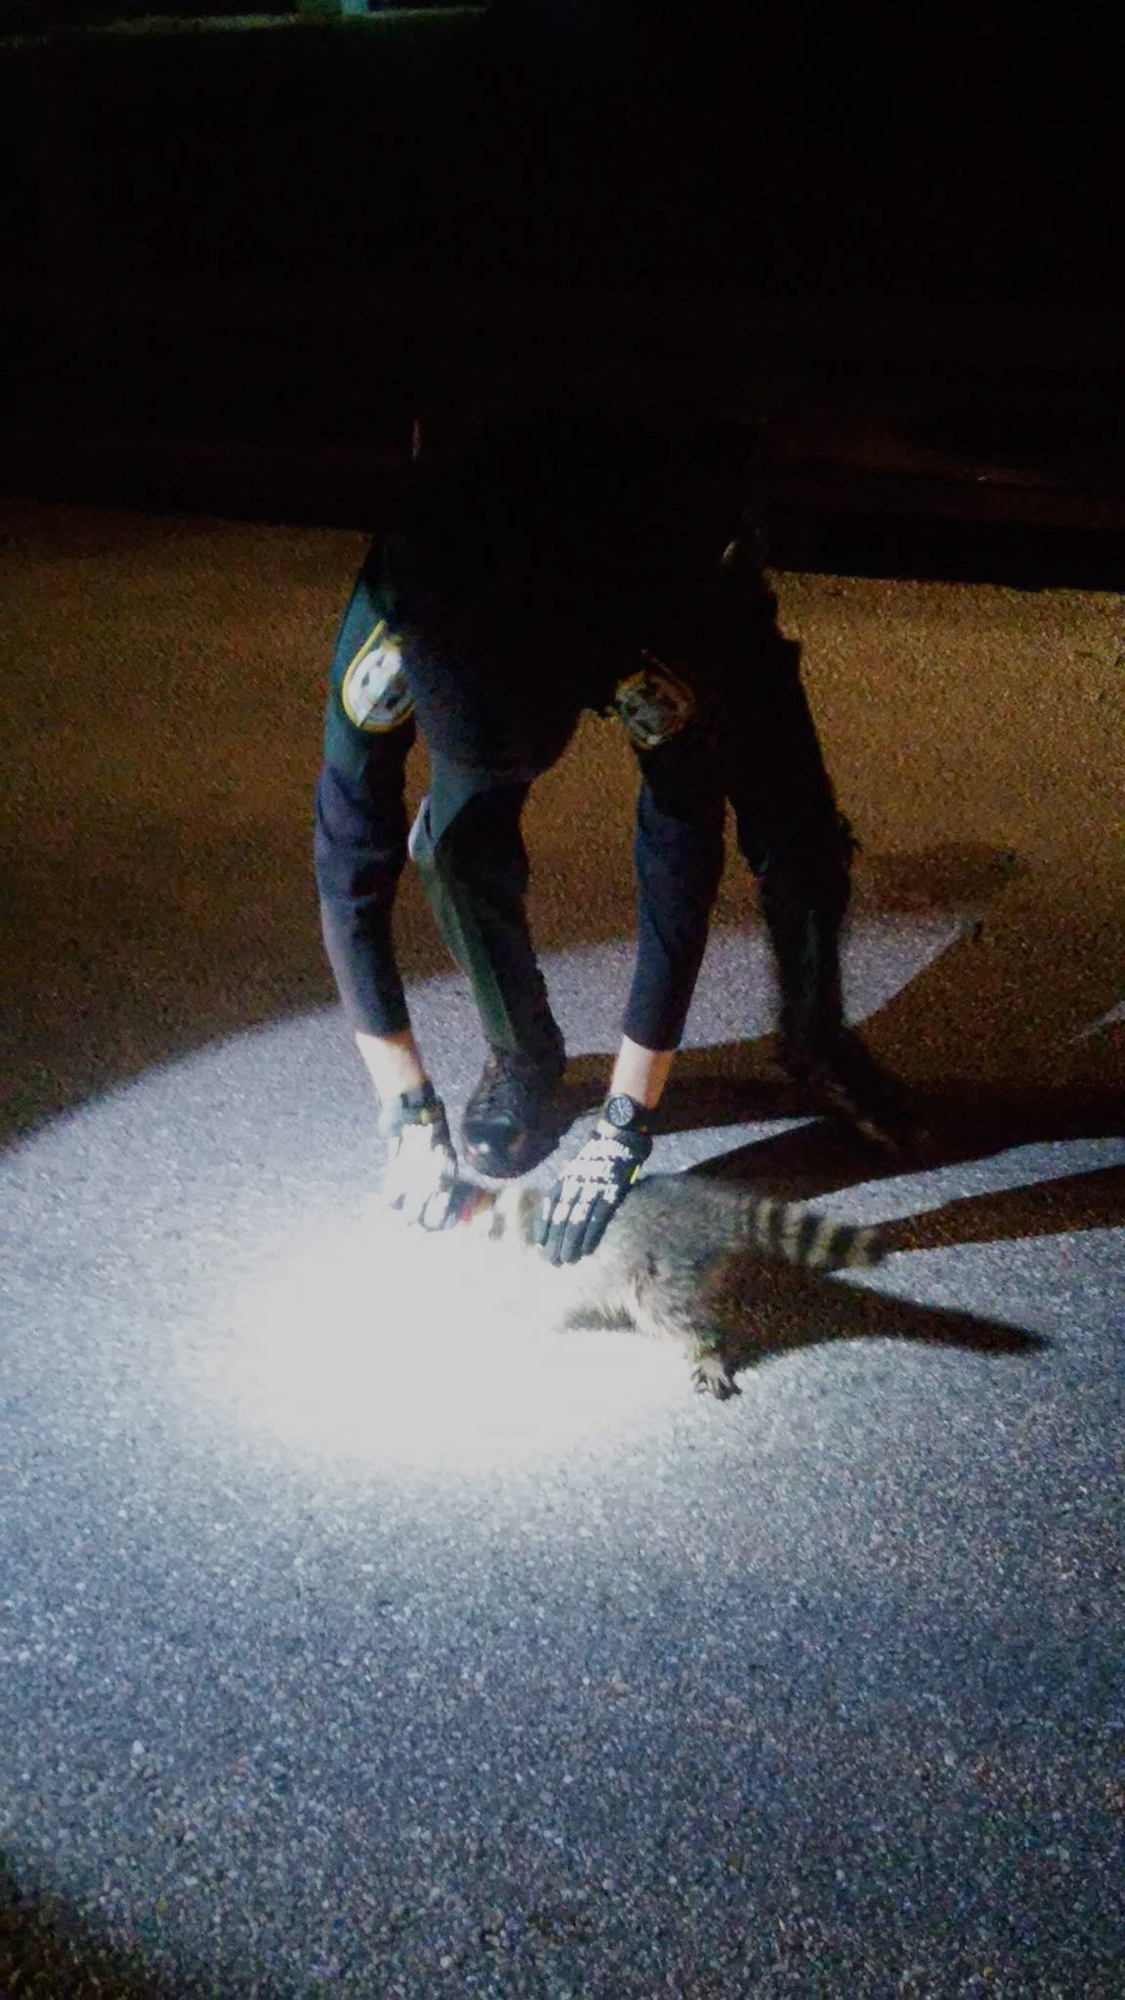 One of the deputies pulled the can off the raccoon's head. Photo courtesy of the Manatee County Sheriff's Office.